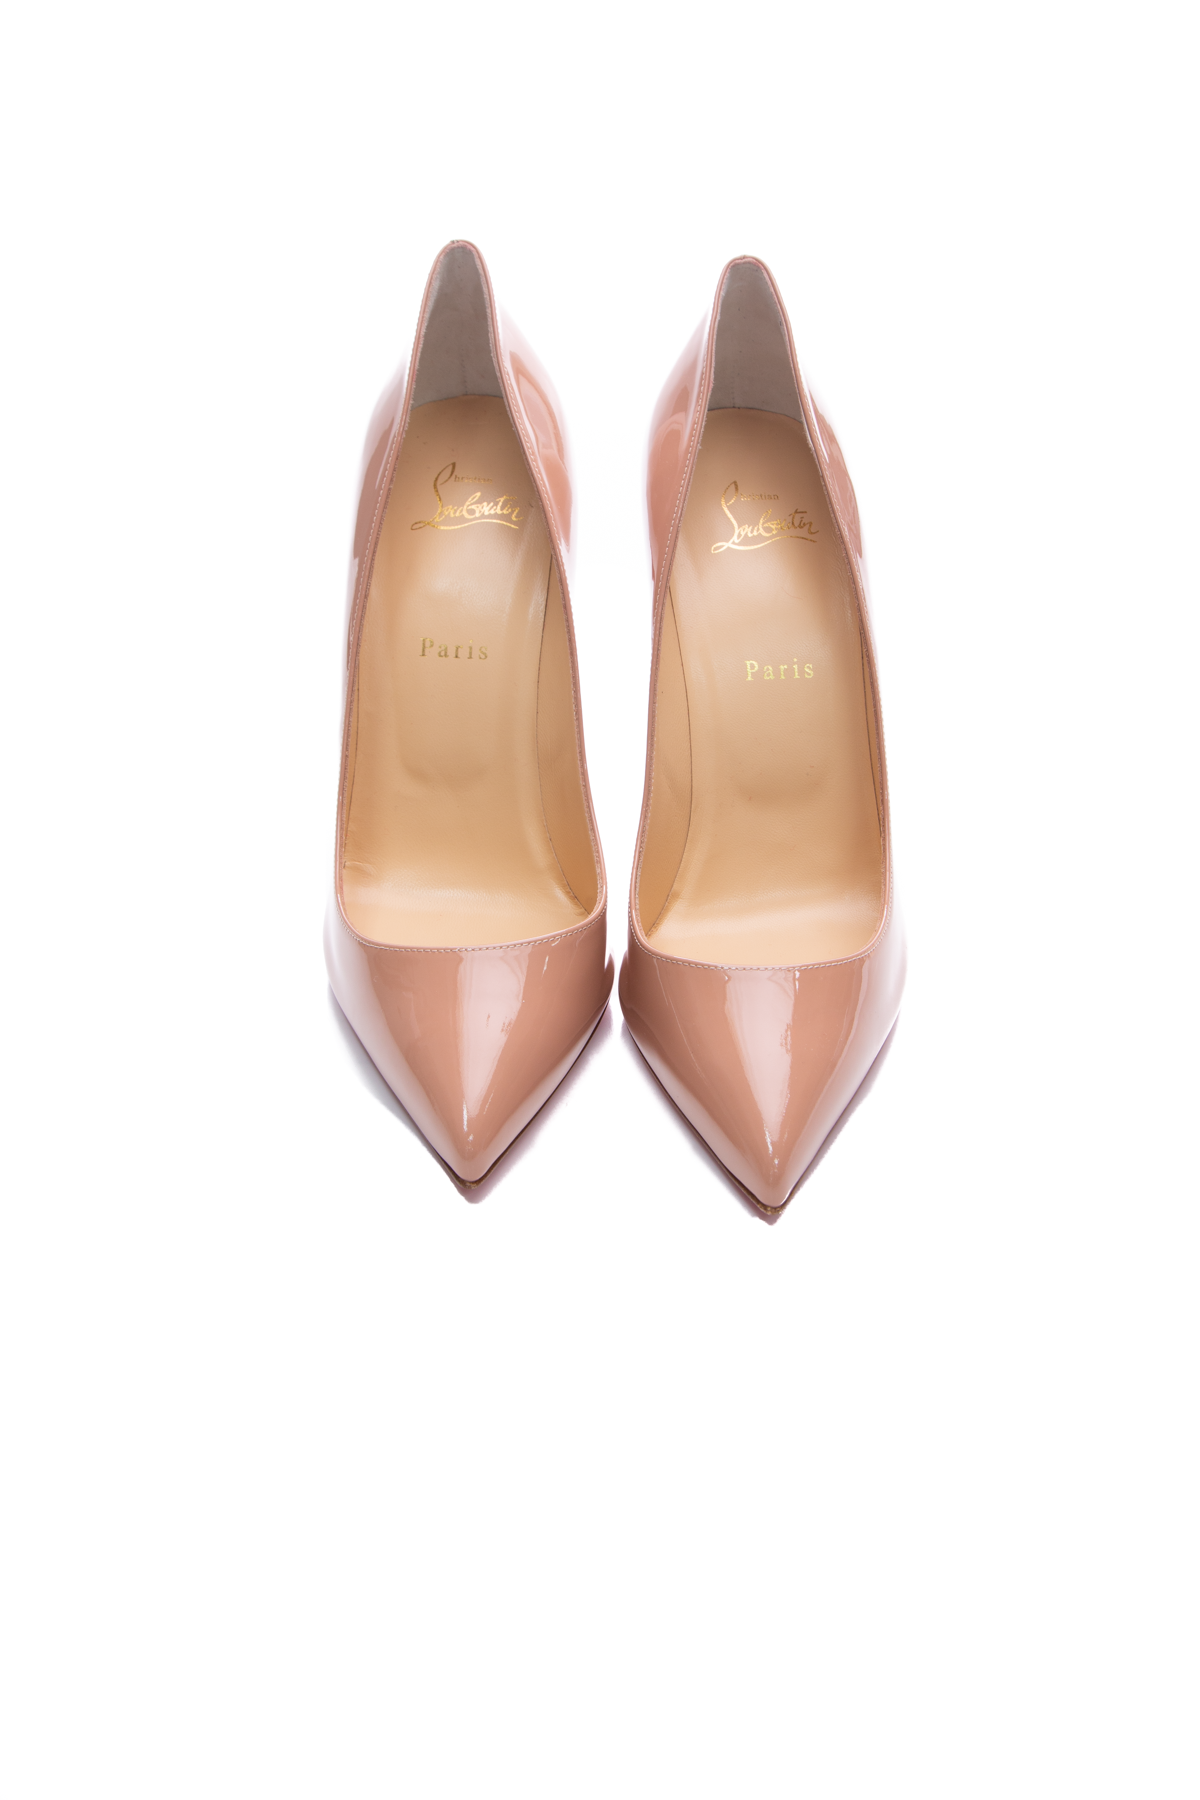 Louboutin Nude Pigalle Follies Pumps